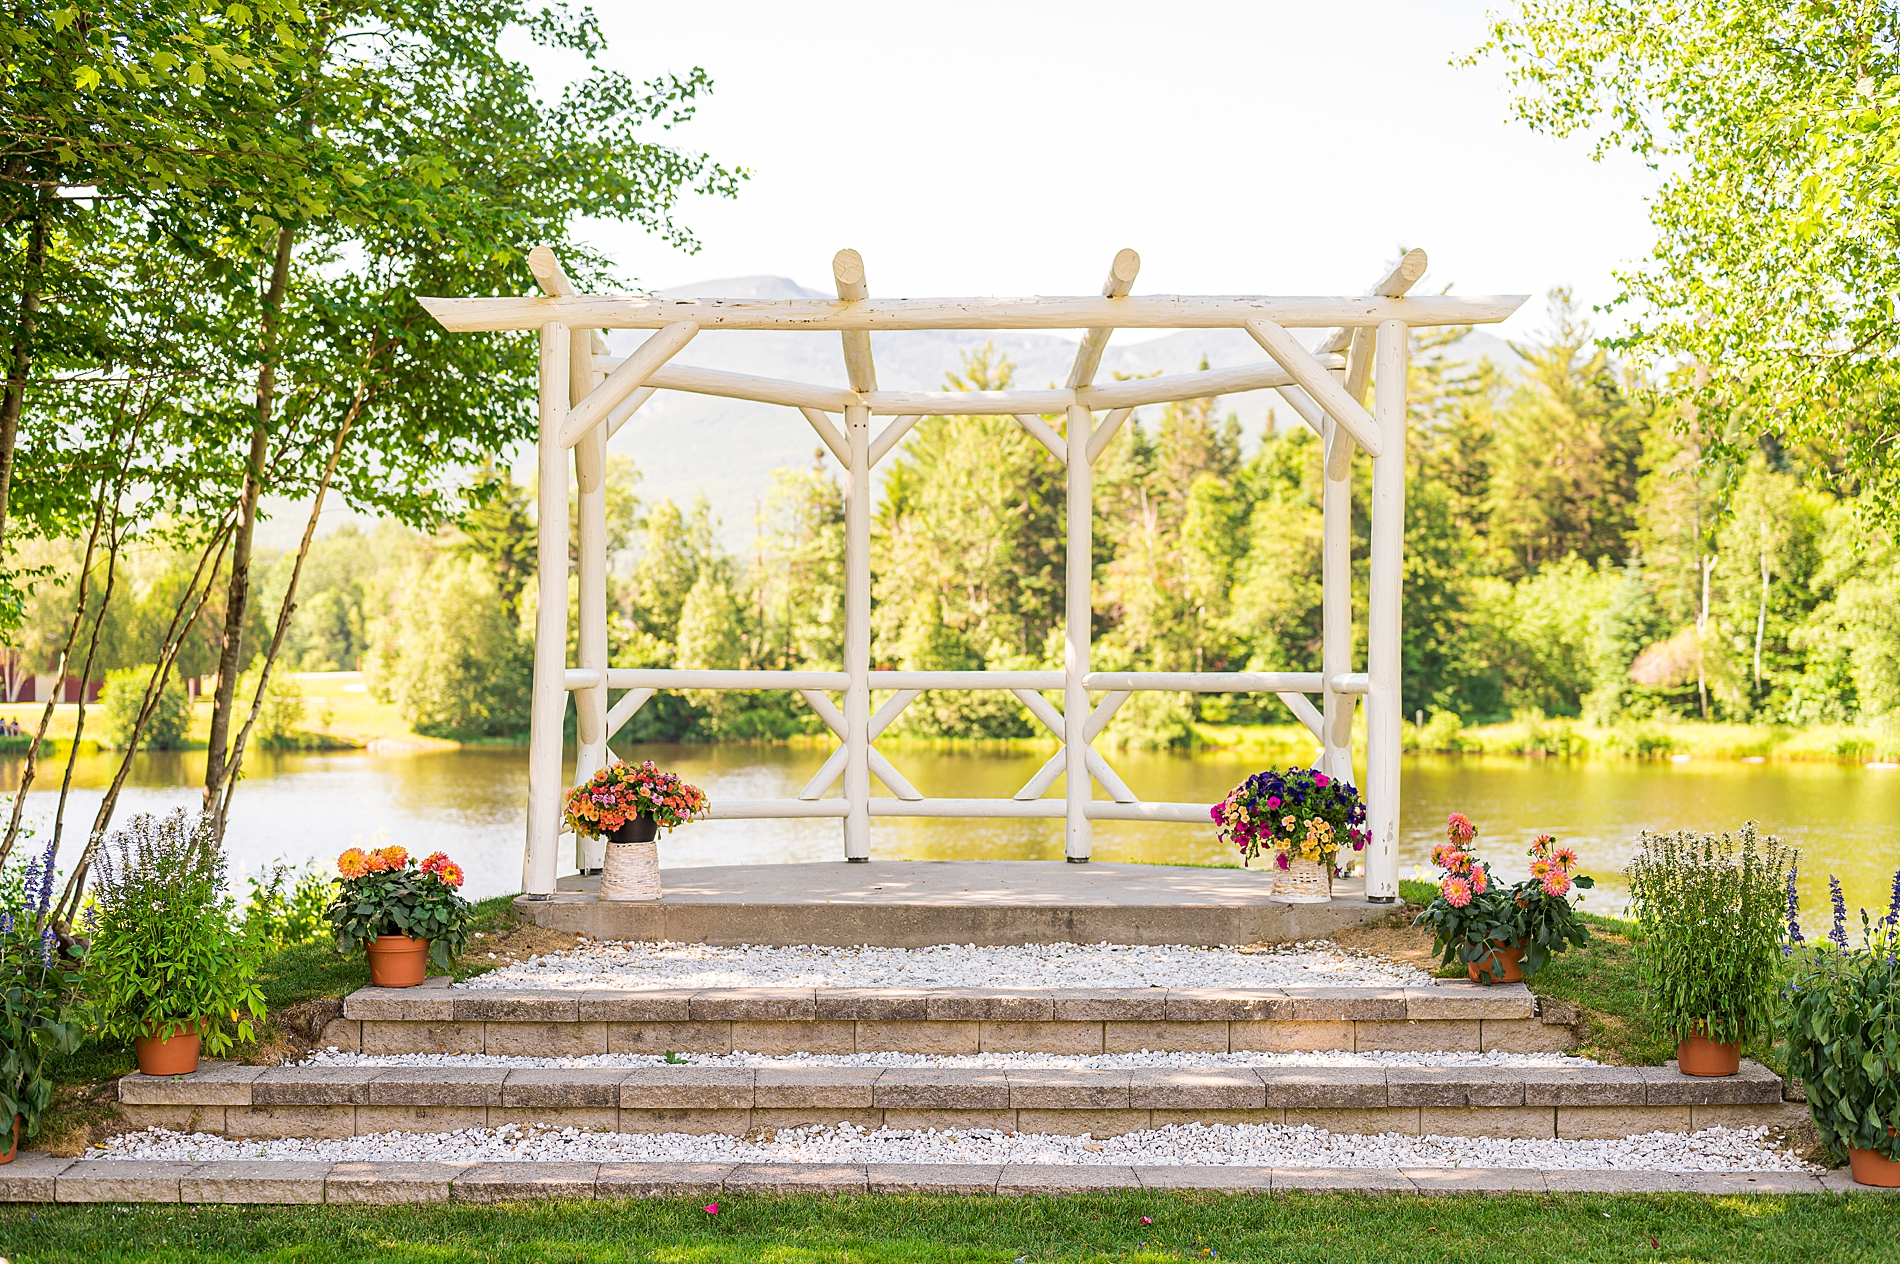 Outdoor NH Summer Wedding ceremony at Waterville Valley Resort overlooking the water and mountains